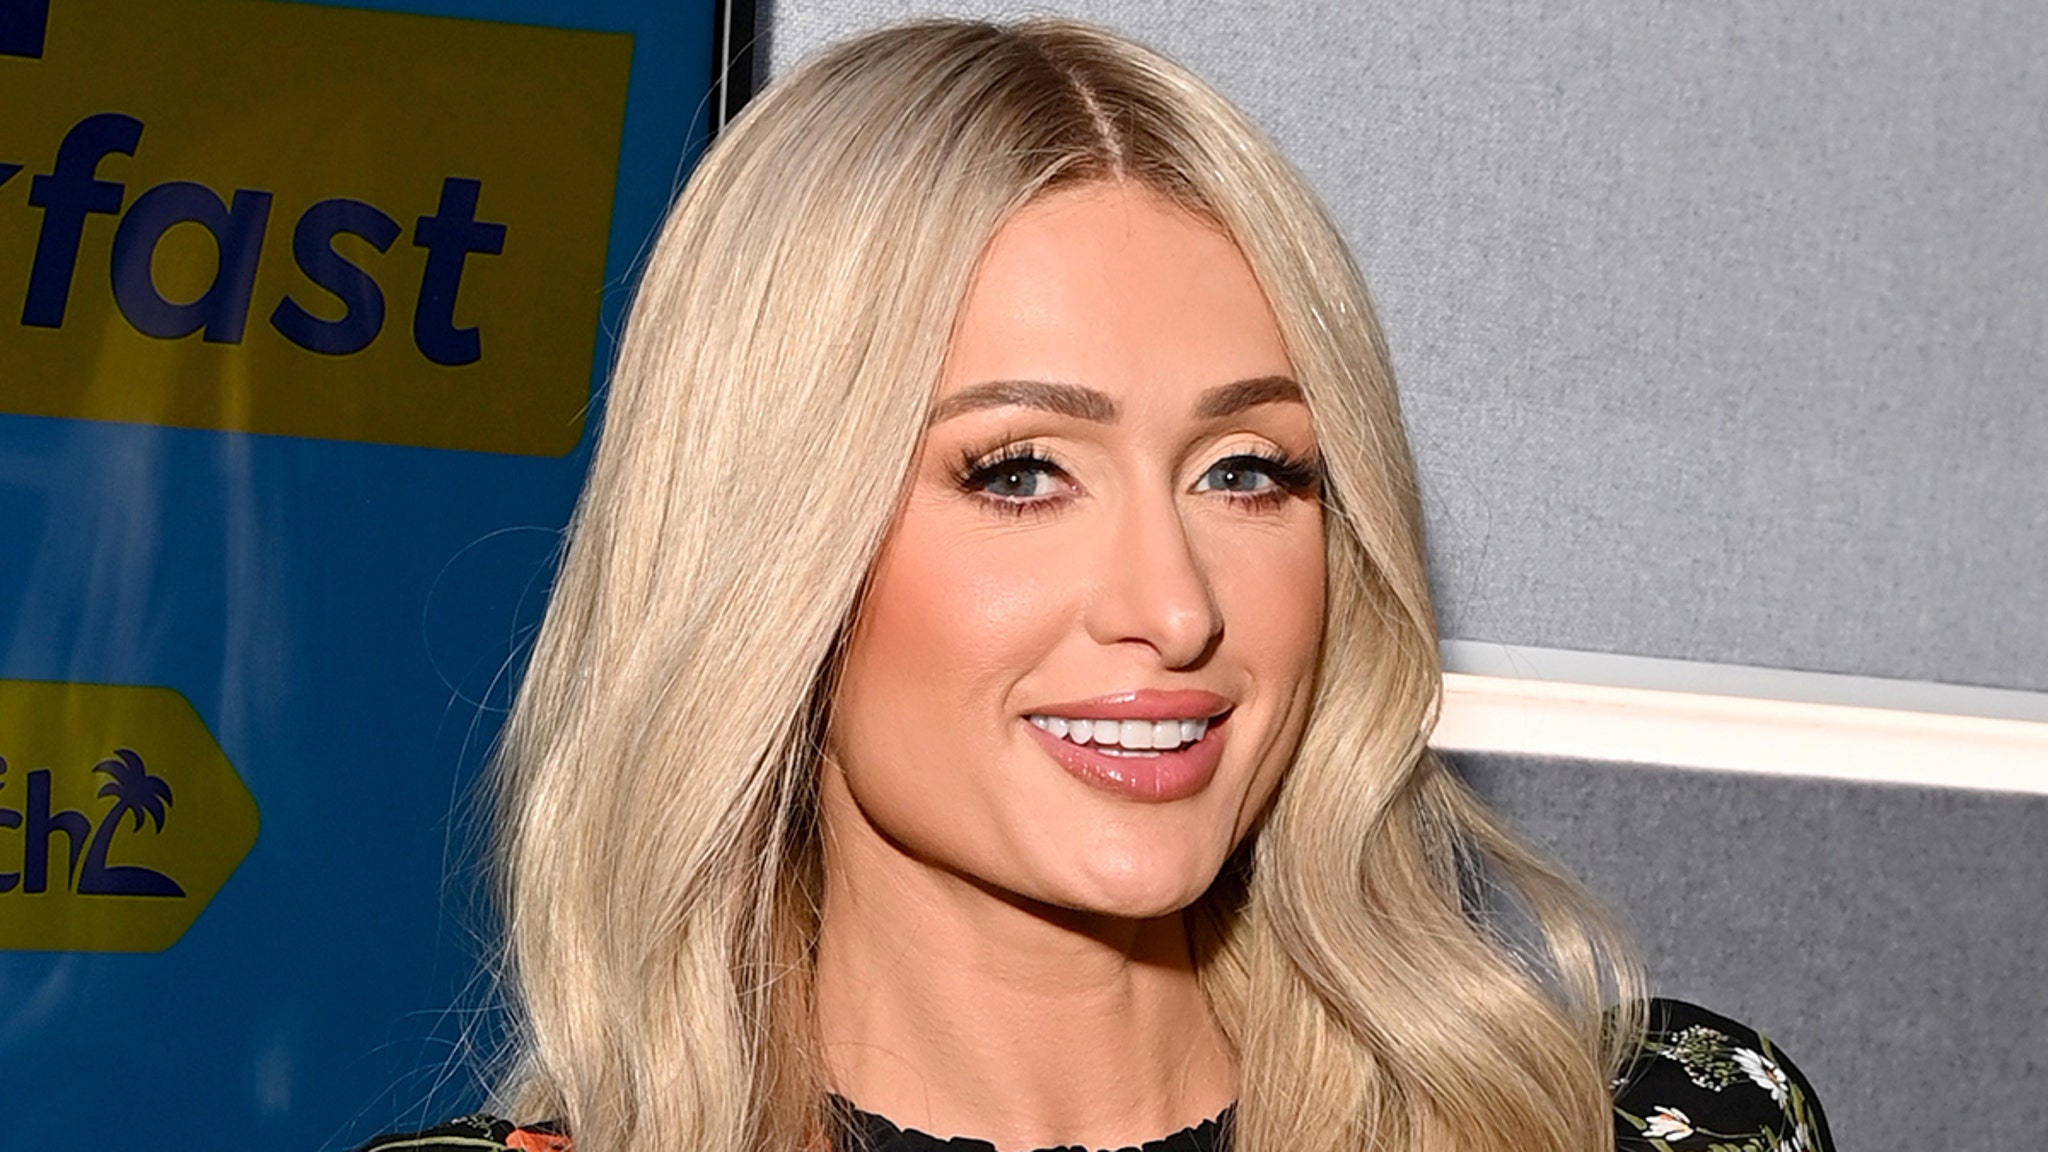 Paris Hilton Shares Photos of Daughter London for the First Time Following Requests from Fans